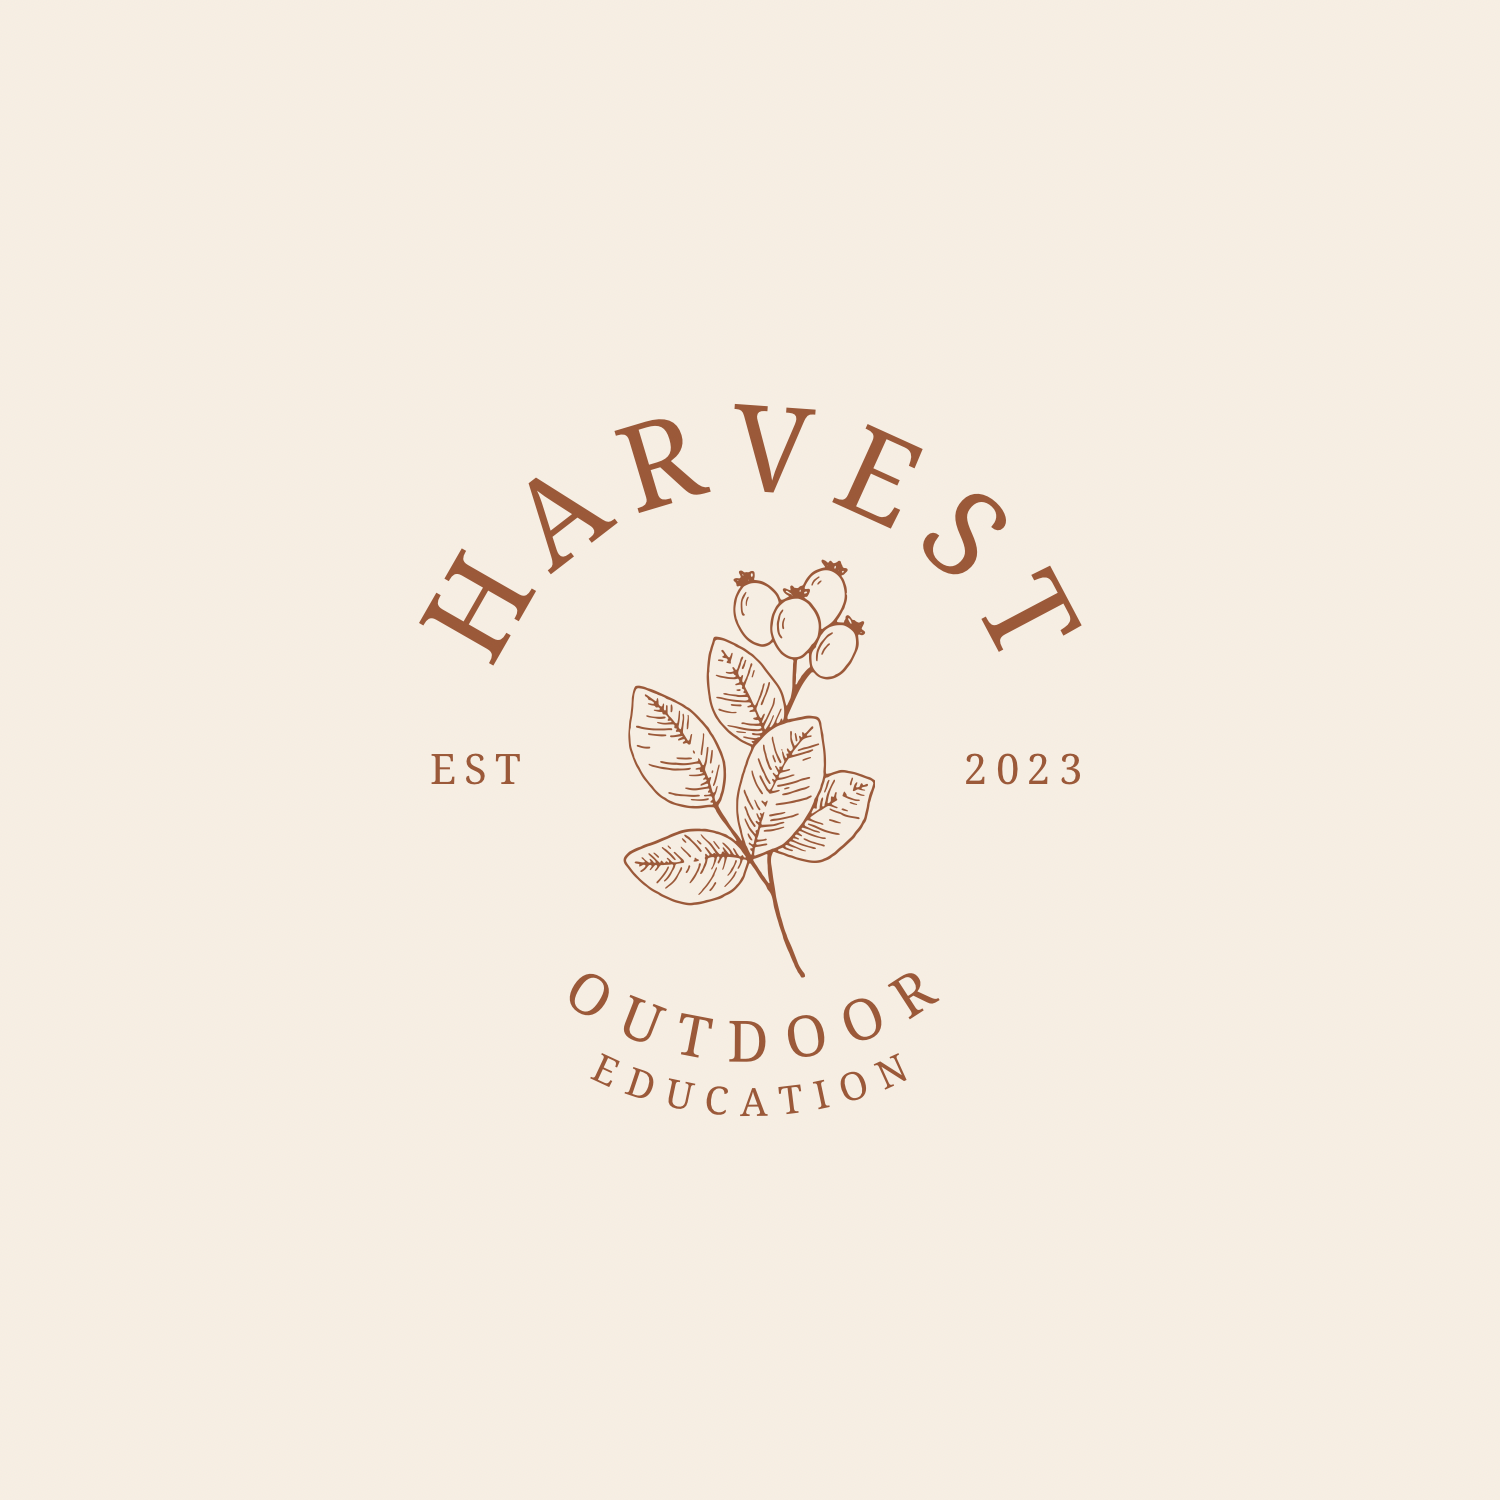 Harvest Outdoor Education